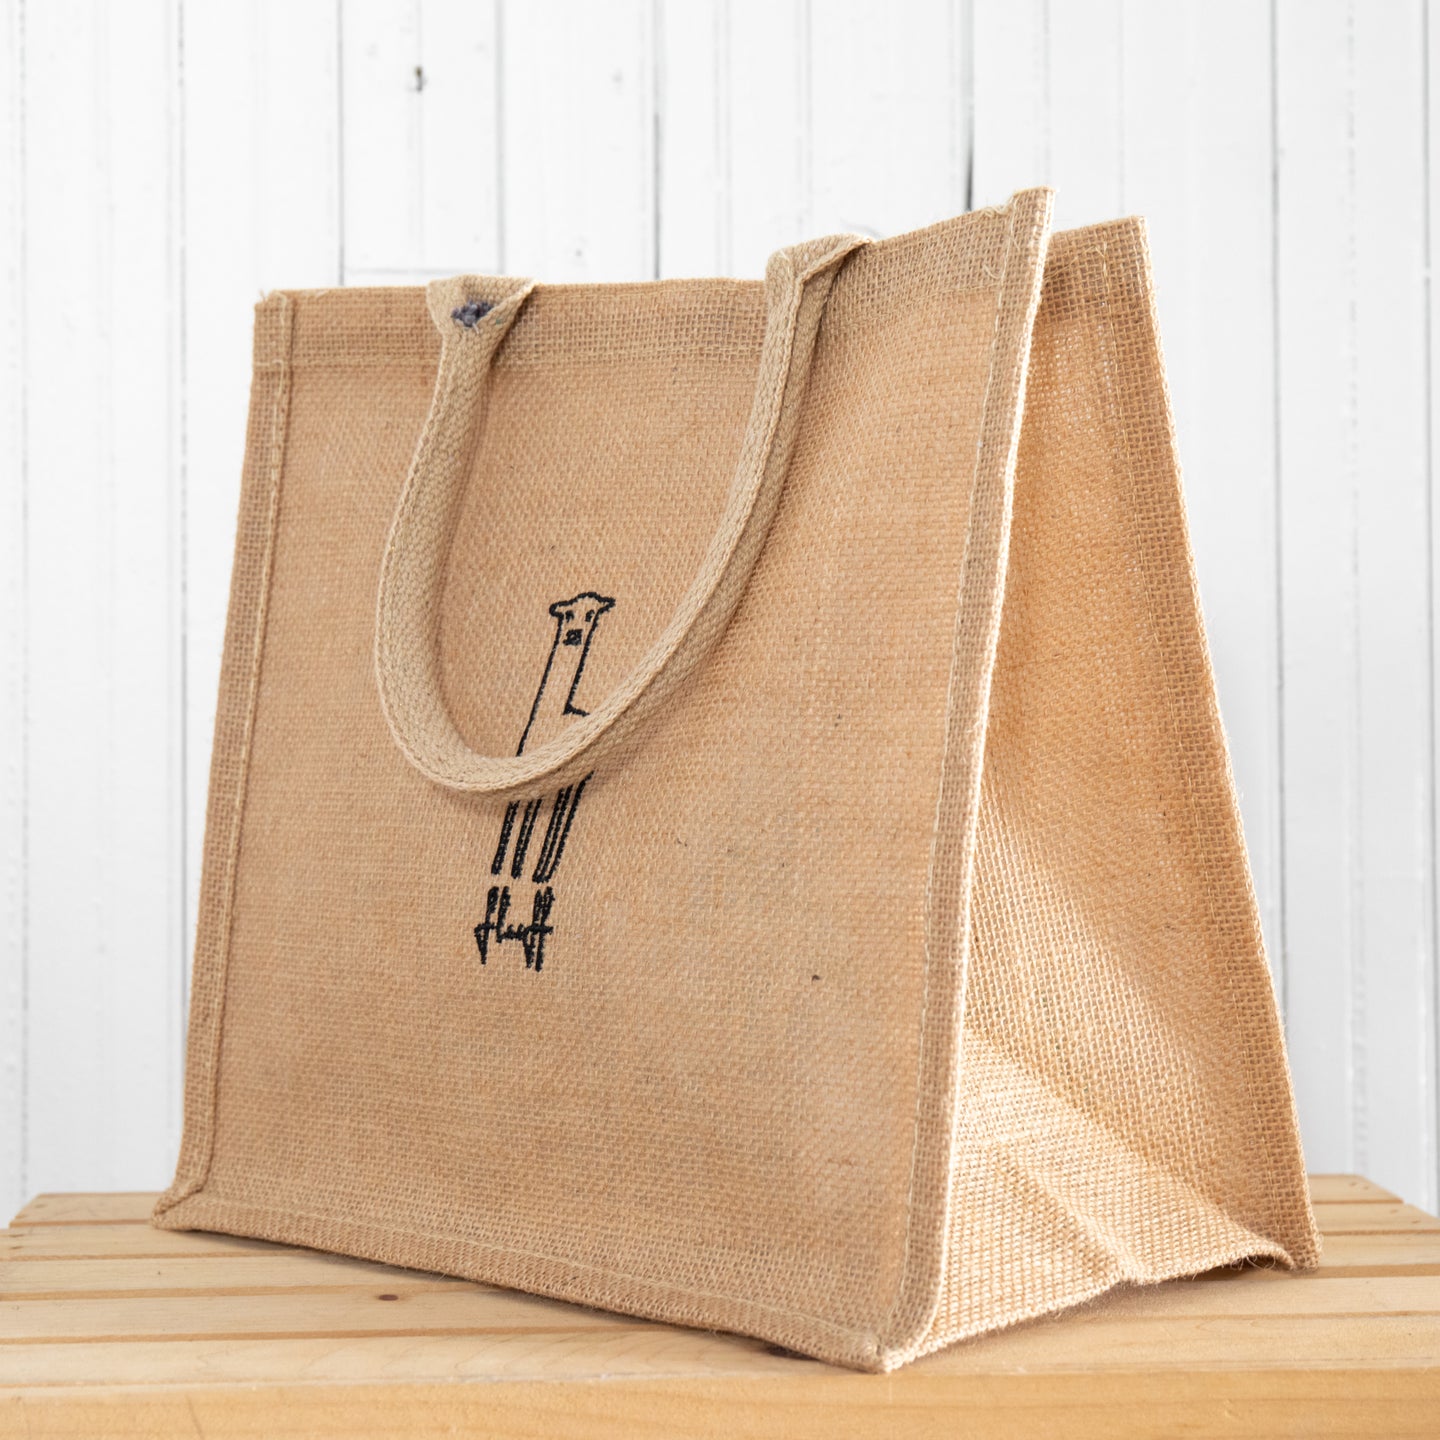 Jute Bags - QualiCorp Gifts Services